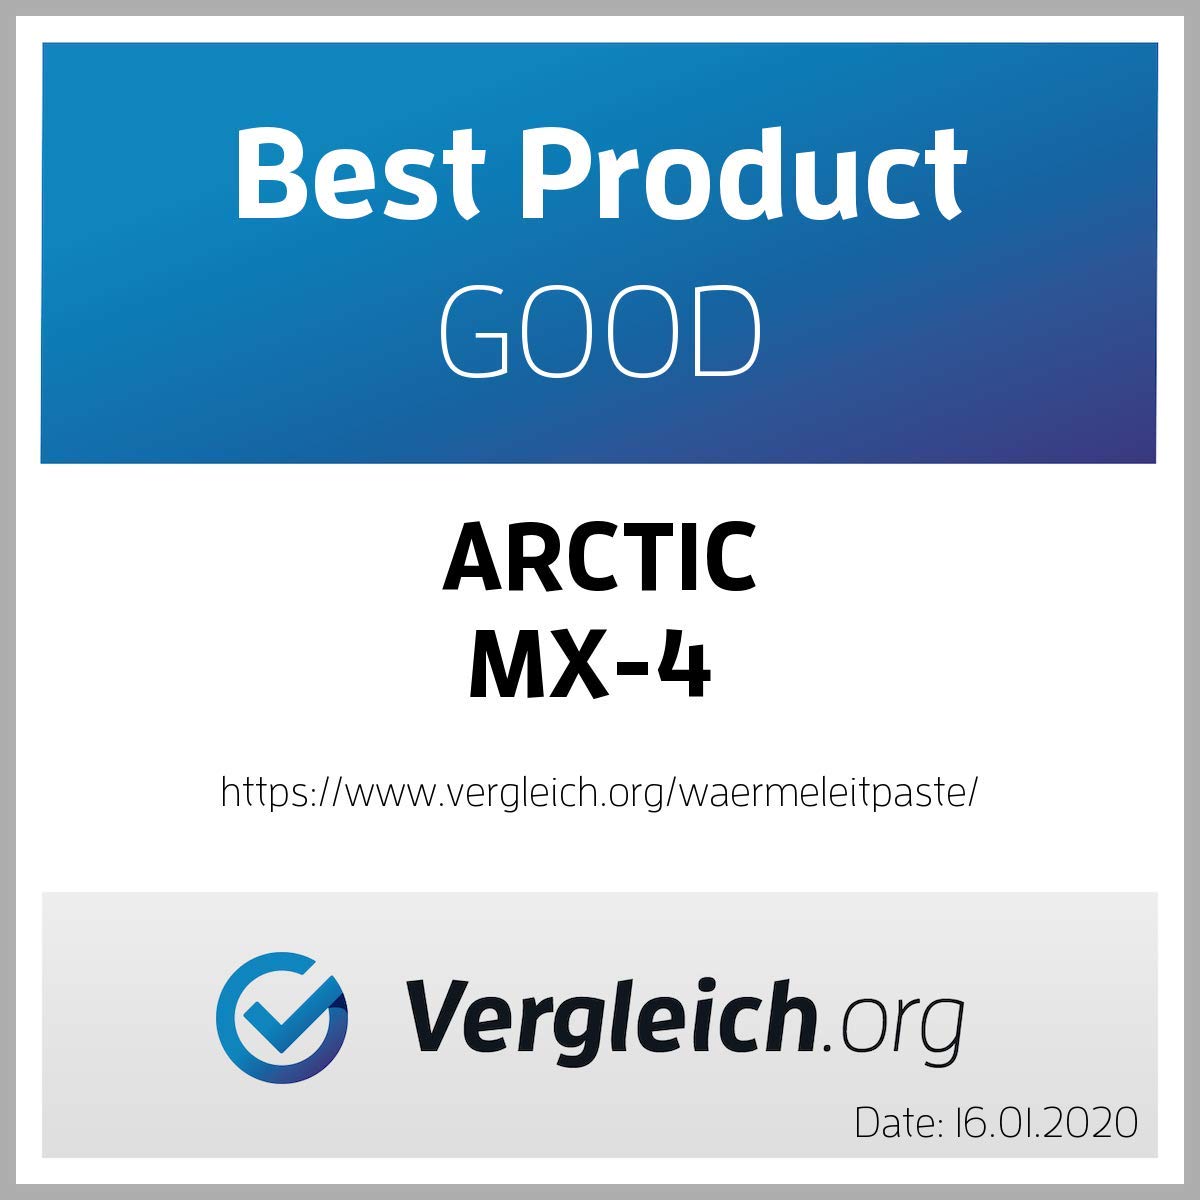 ARCTIC MX-4 (4 g) - Premium Performance Thermal Paste for All Processors (CPU, GPU - PC, PS4, Xbox), Very high Thermal Conductivity, Long Durability, Safe Application, Non-Conductive, Non-capacitive